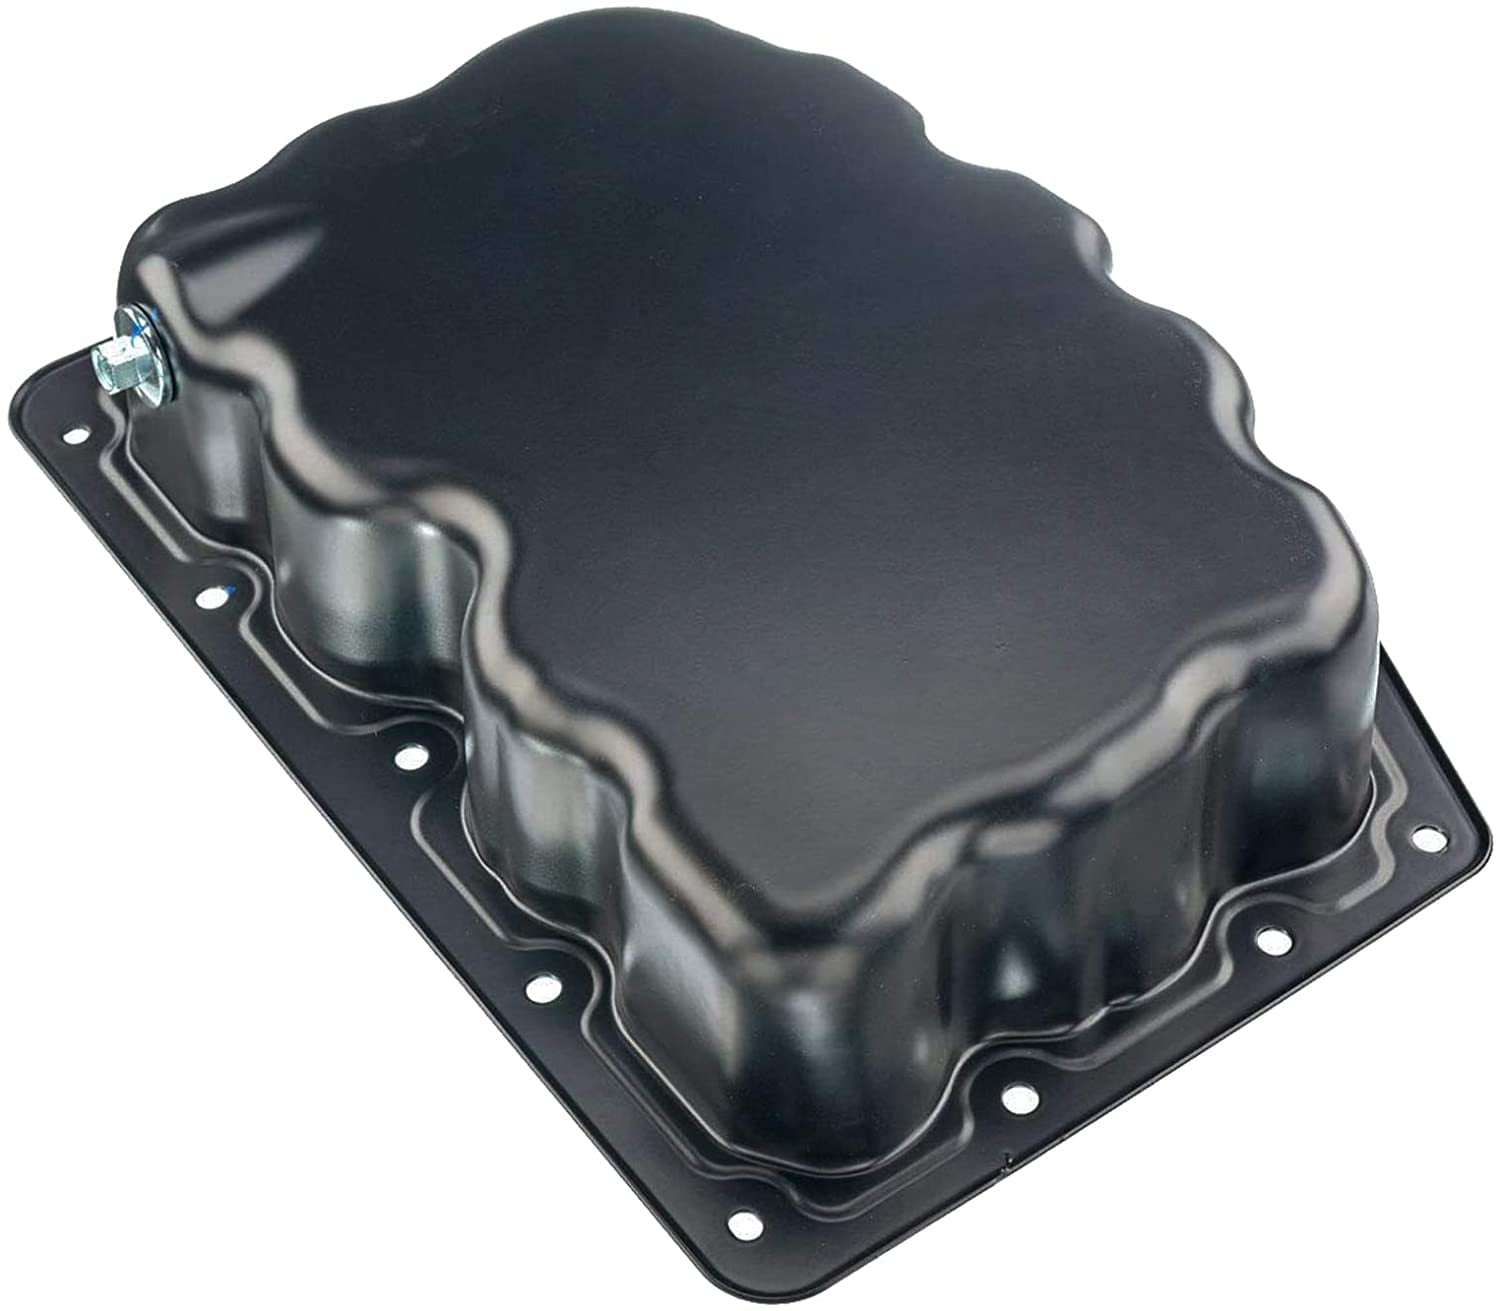 A-Premium Lower Engine Oil Pan with Drain Plug Compatible with Ford F-250/350/450/550 Super Duty 2011-2018 V8 6.7L